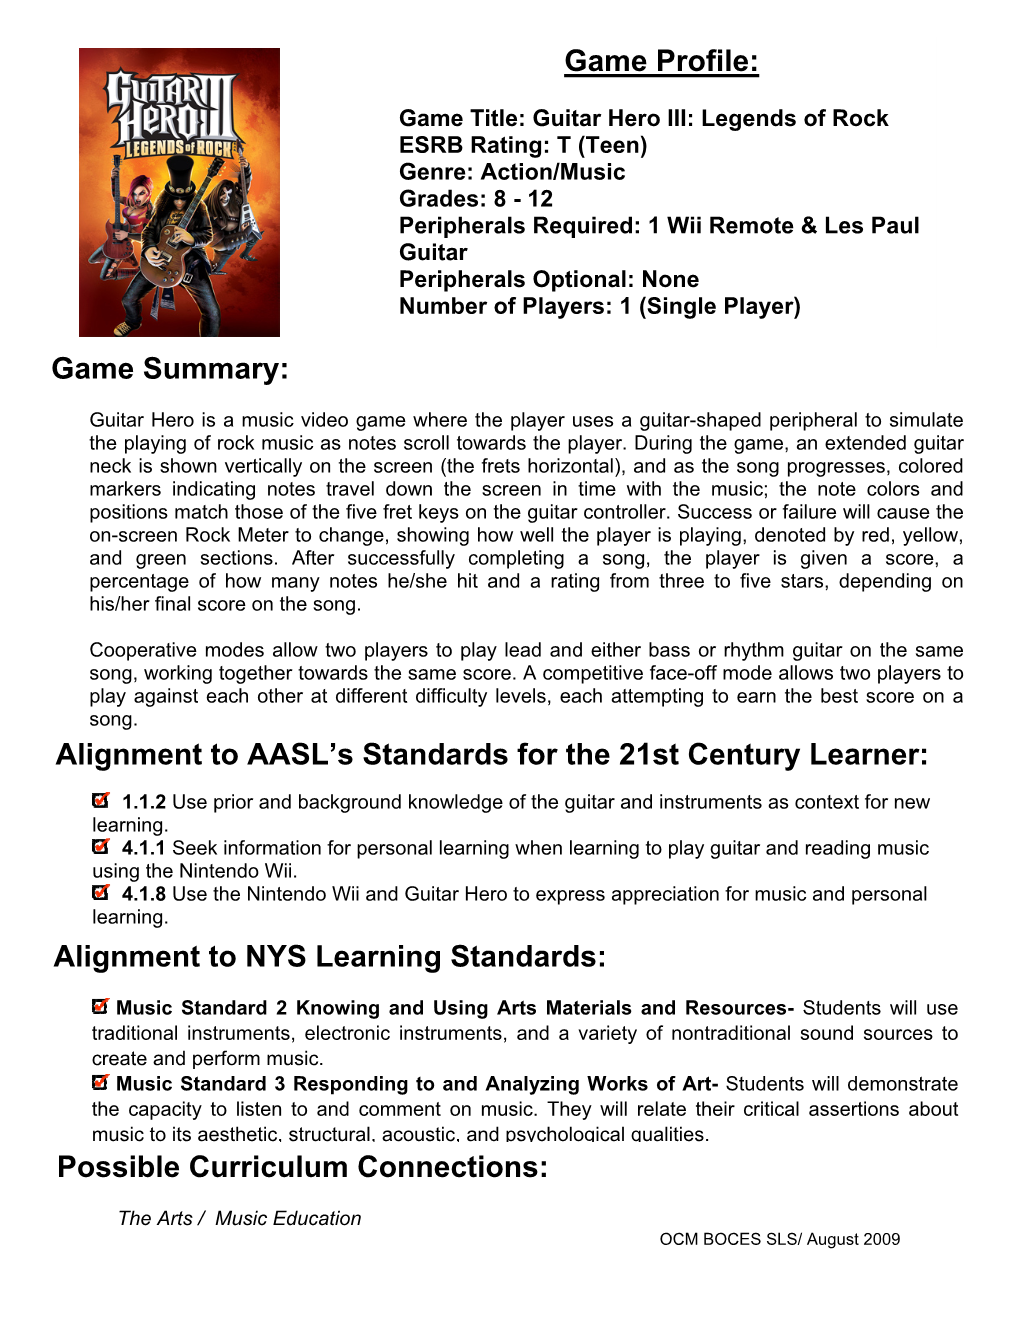 Alignment to NYS Learning Standards: Possible Curri